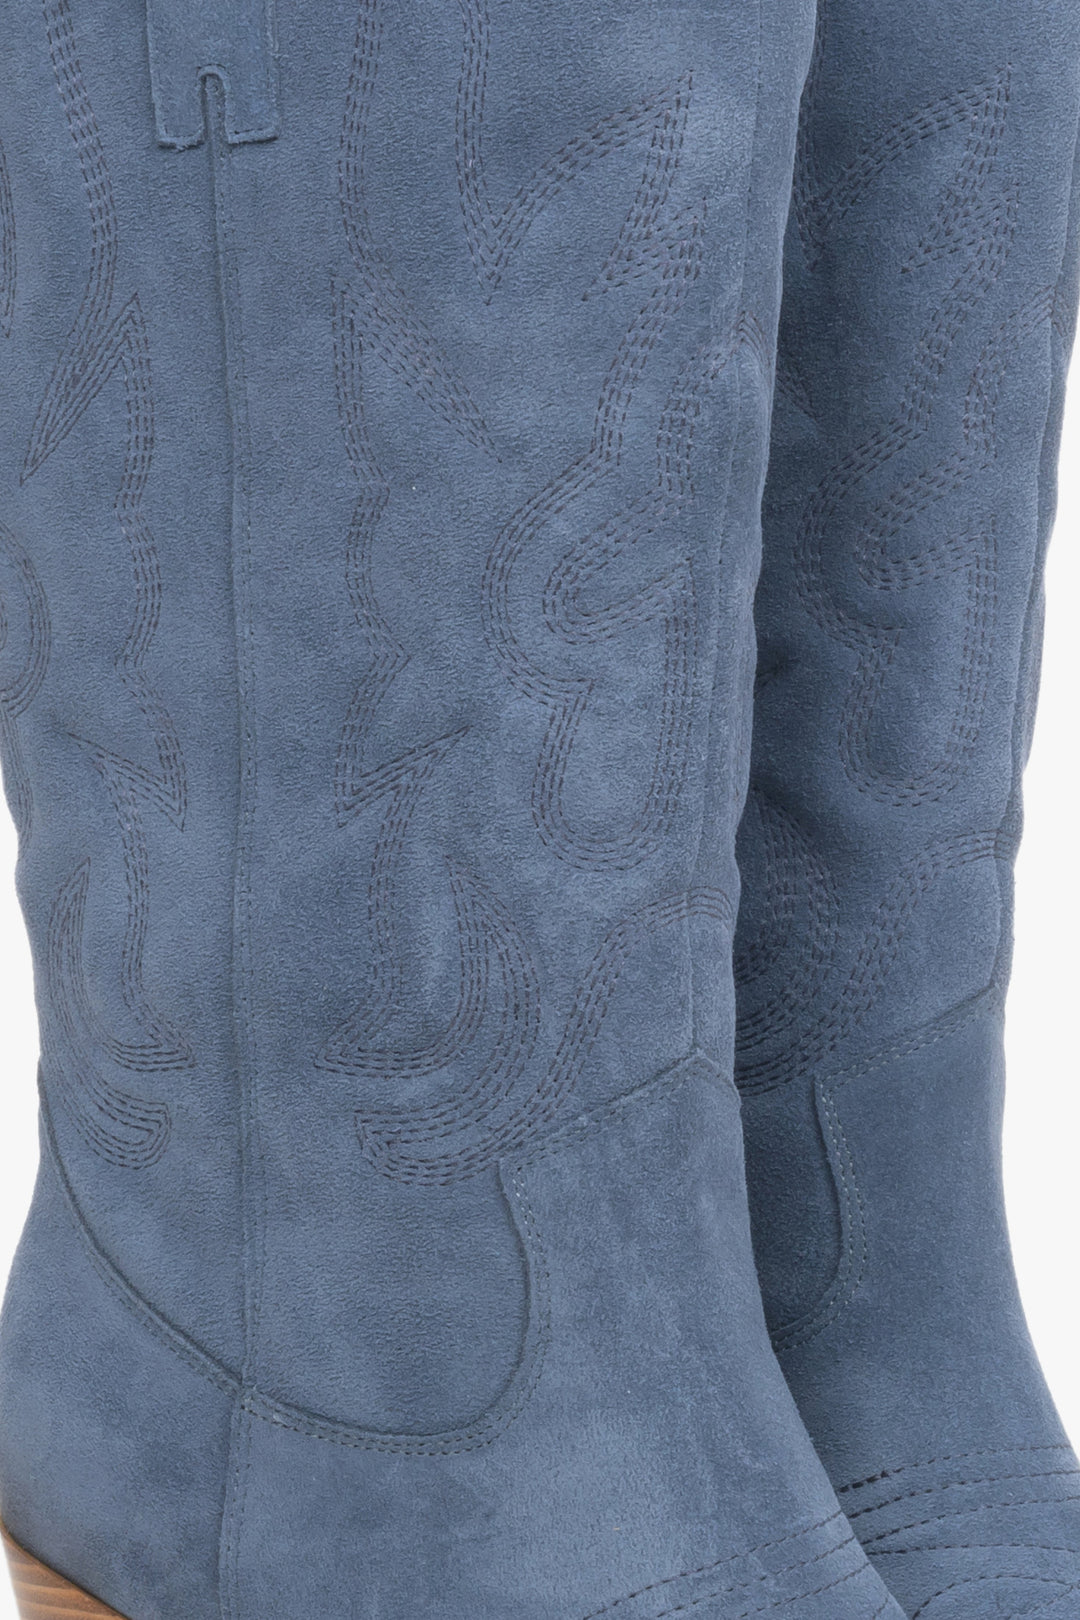 Blue high women's cowboy boots made of genuine velour, Estro - close-up on the detail.